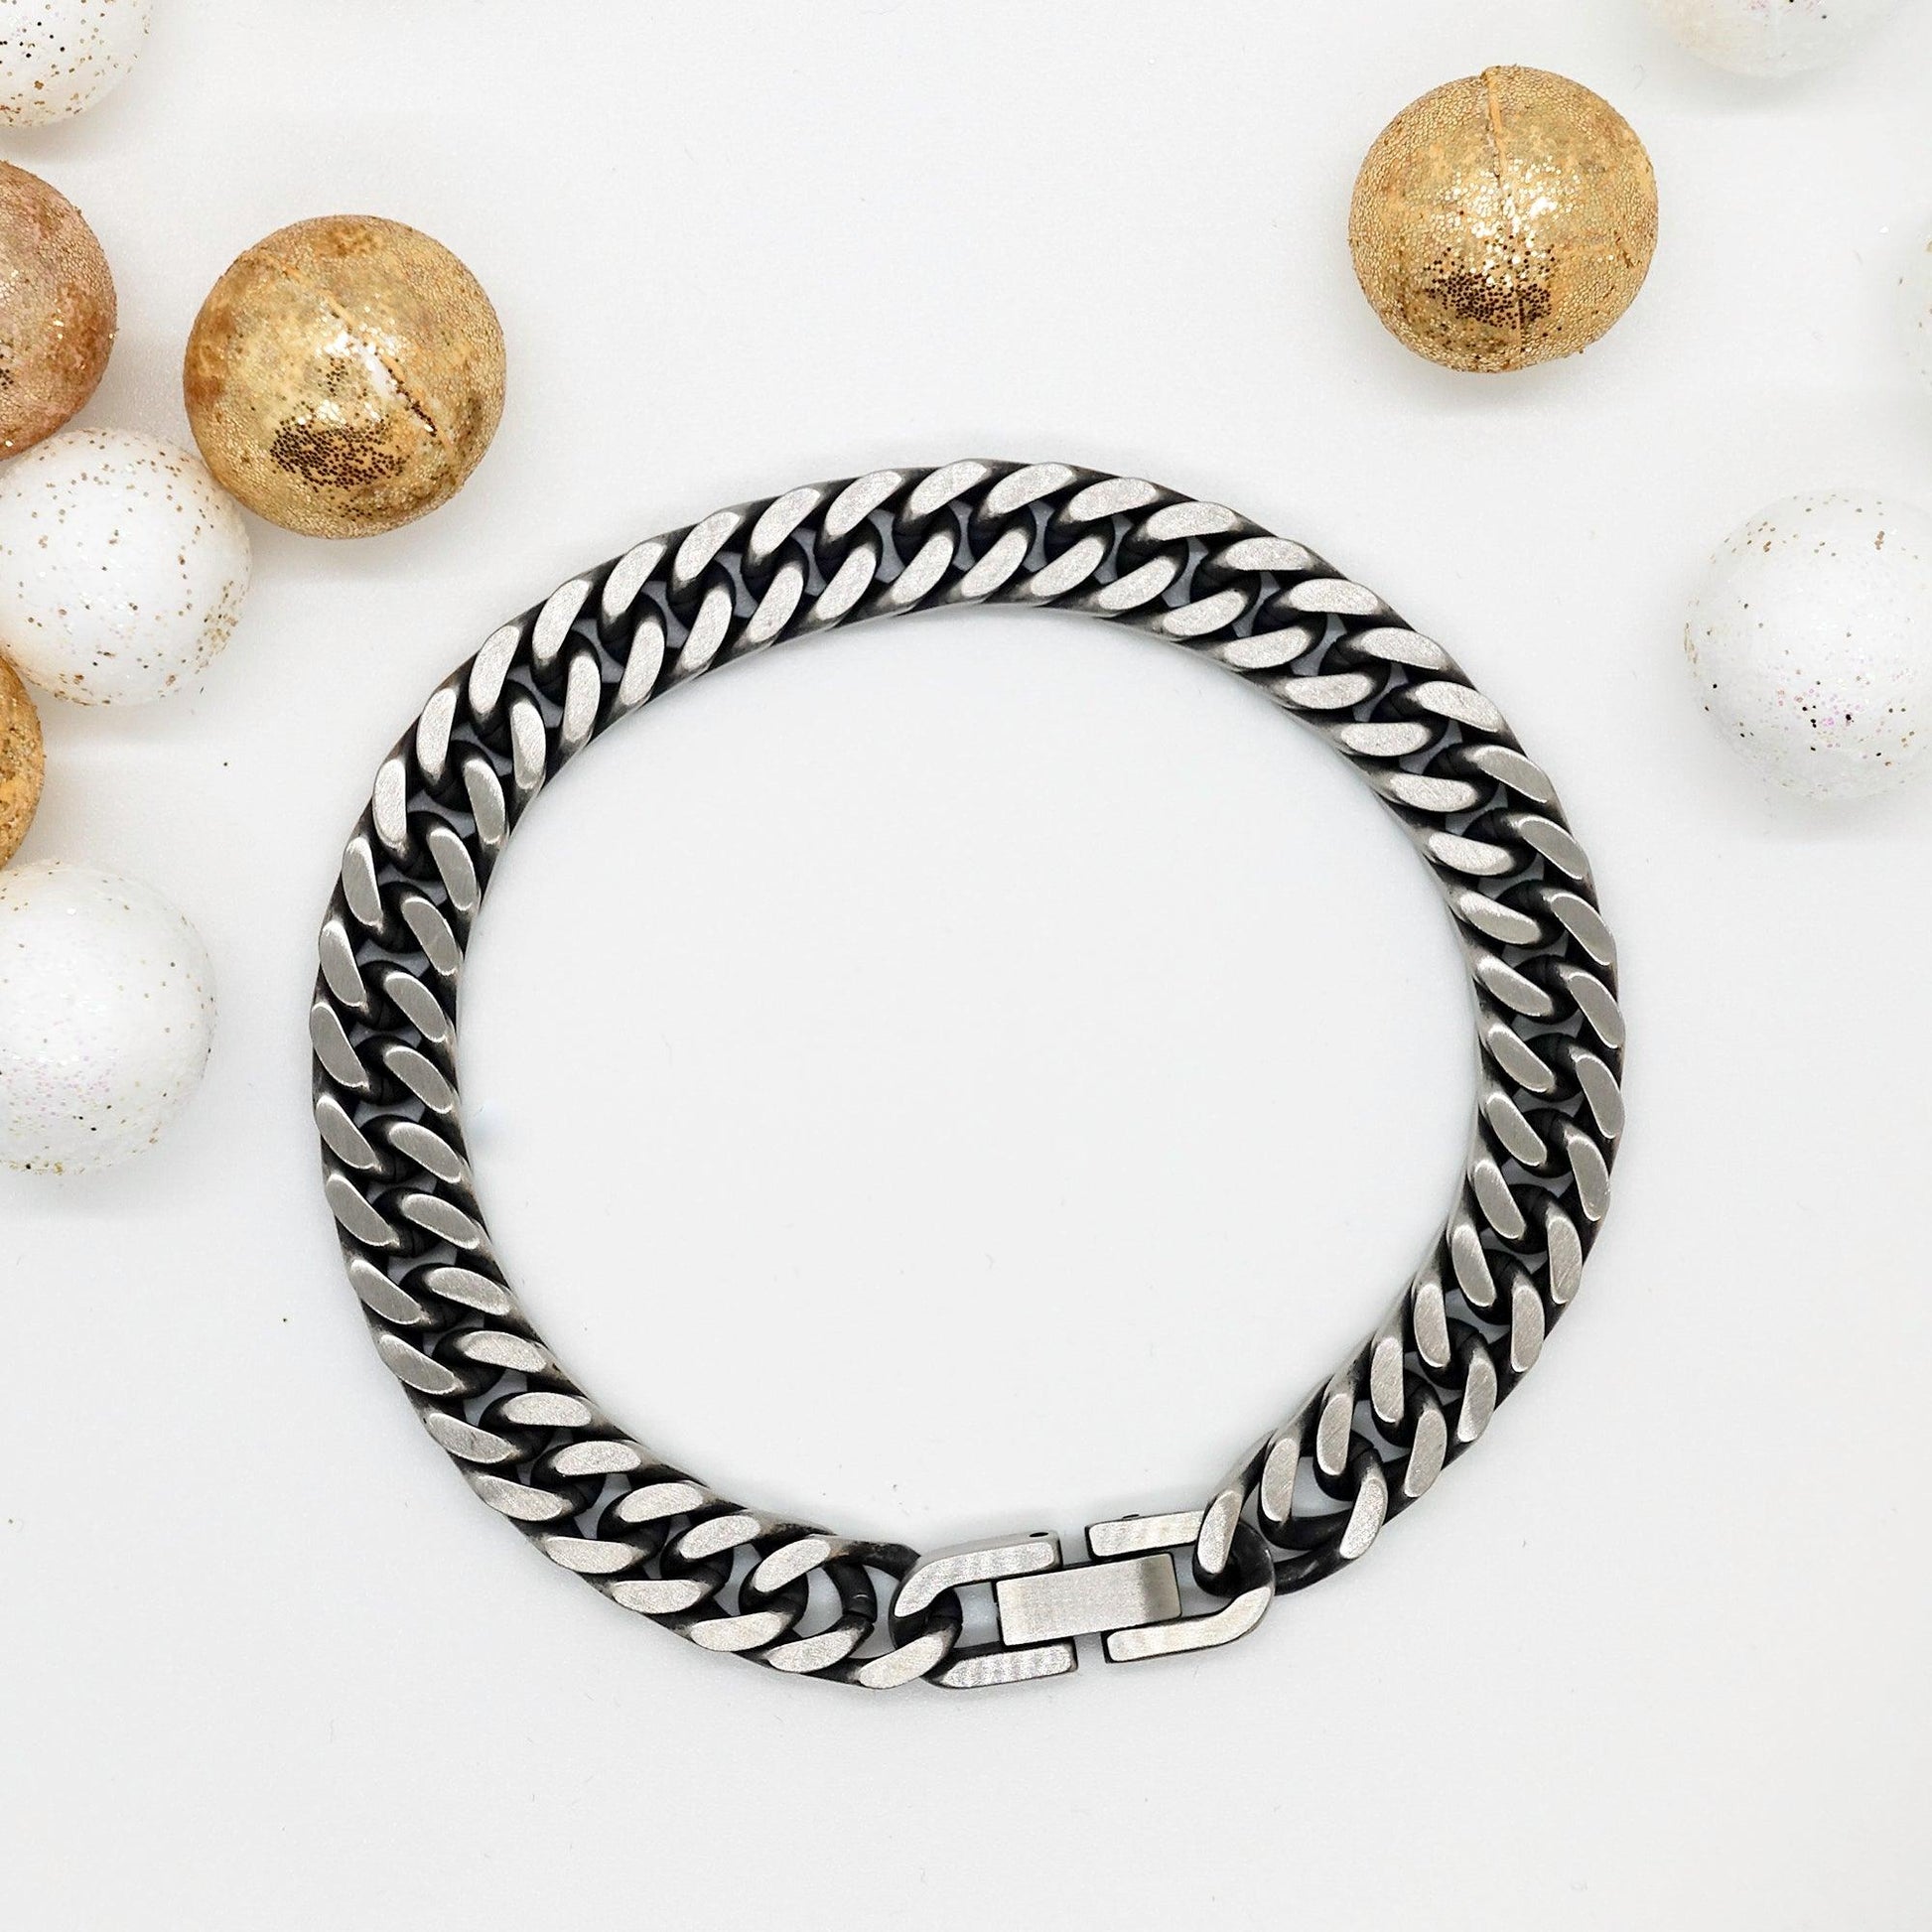 Sarcastic Executive Assistant Cuban Link Chain Bracelet Gifts, Christmas Holiday Gifts for Executive Assistant Birthday Message Card, Executive Assistant: Because greatness is woven into the fabric of every day, Coworkers, Friends - Mallard Moon Gift Shop